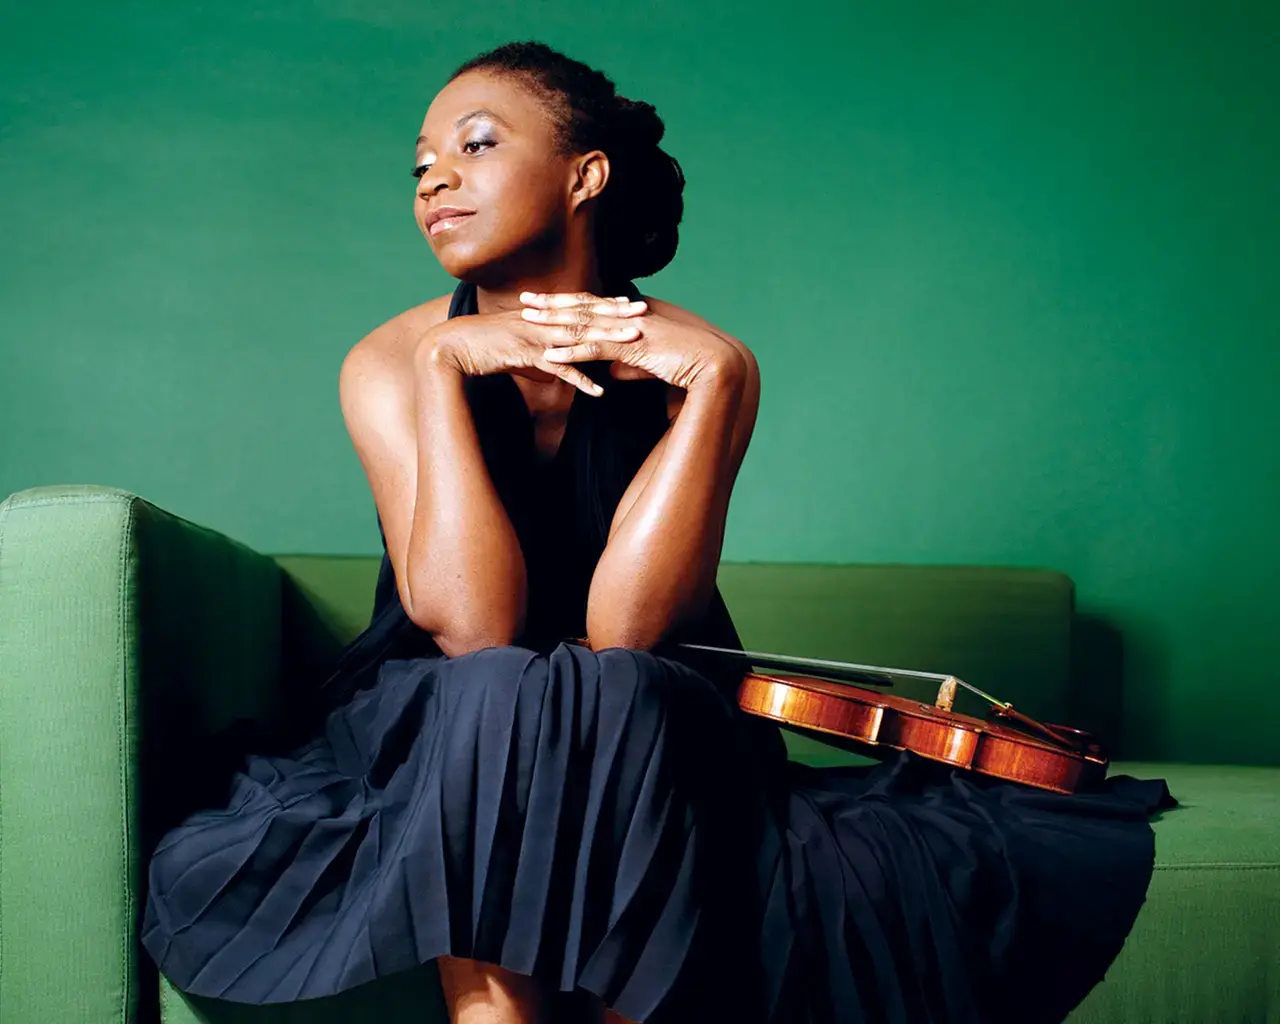 Violinist Tai Murray returns to the Philadelphia Chamber Music Society (PCMS) for a journey from early romanticism to modernism in a delightfully eclectic program featuring two PCMS 30th Anniversary commissions. Photo by Julia Wesely. Courtesy of the Philadelphia Chamber Music Society.